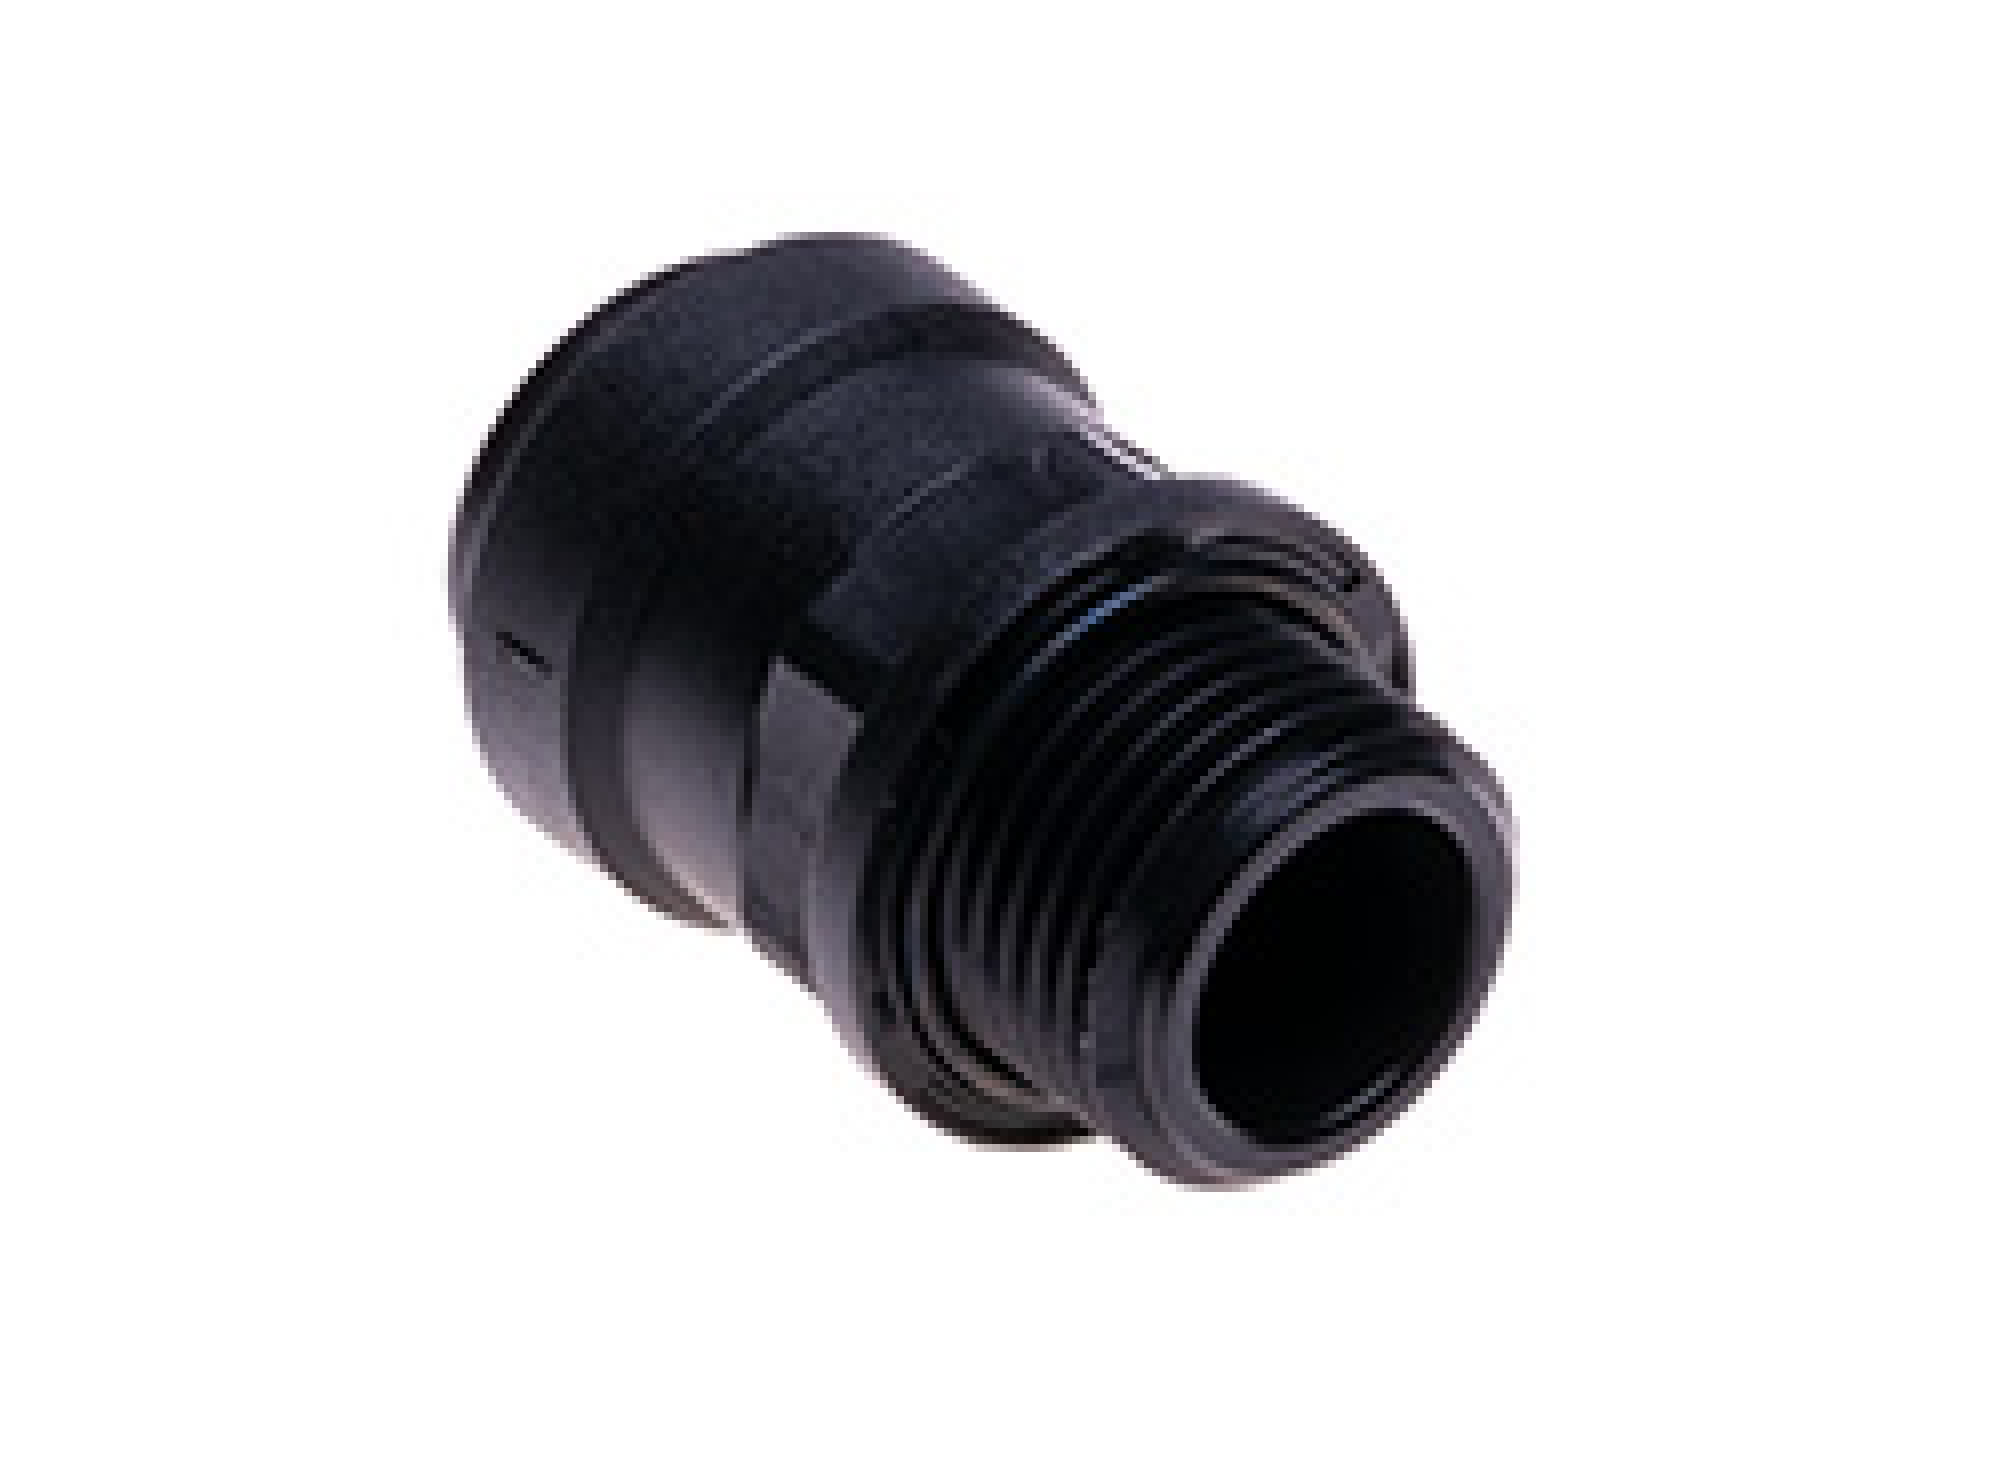 Straight screw - cylindrical 1/2" for plastic tubing 15 mm